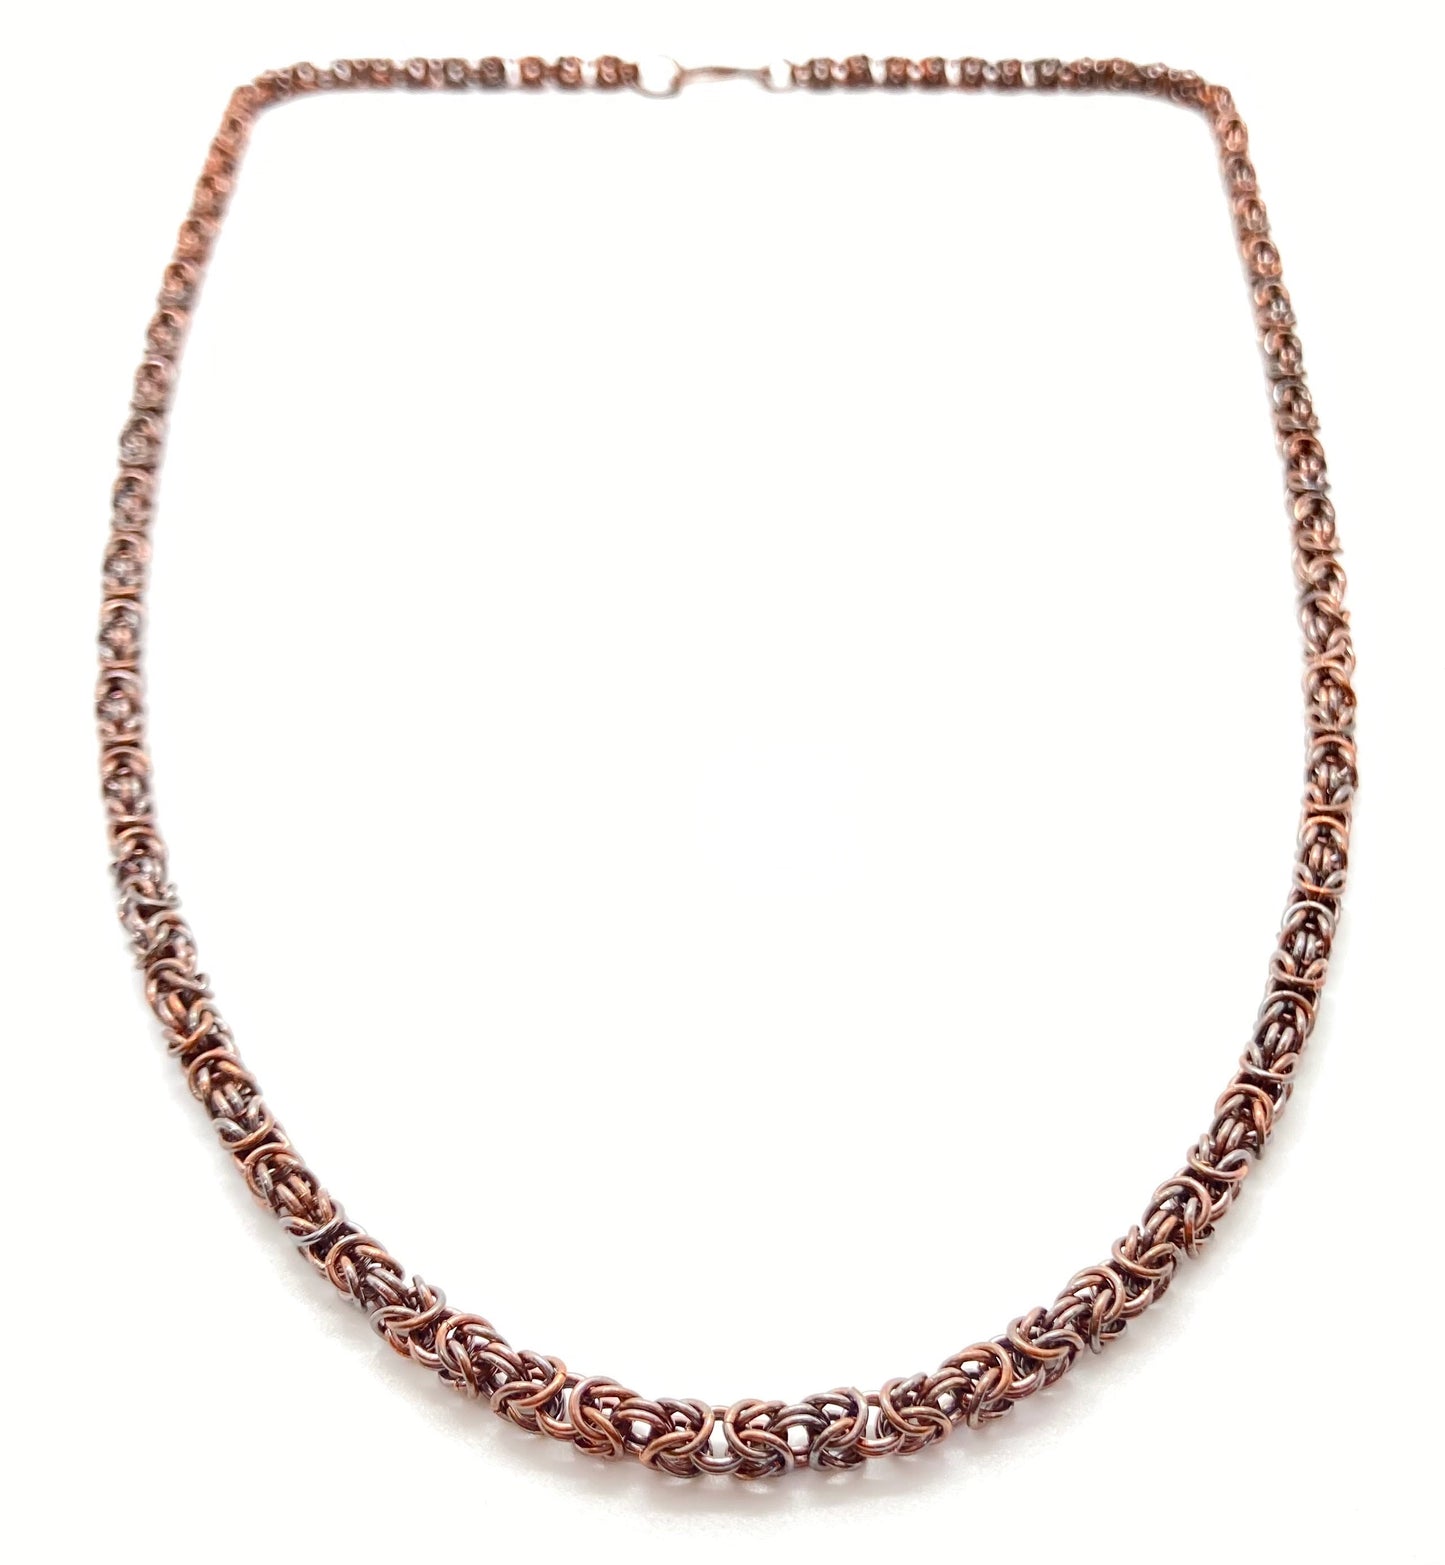 Delicate Byzantine Chainmaille Necklace in Oxidized Copper